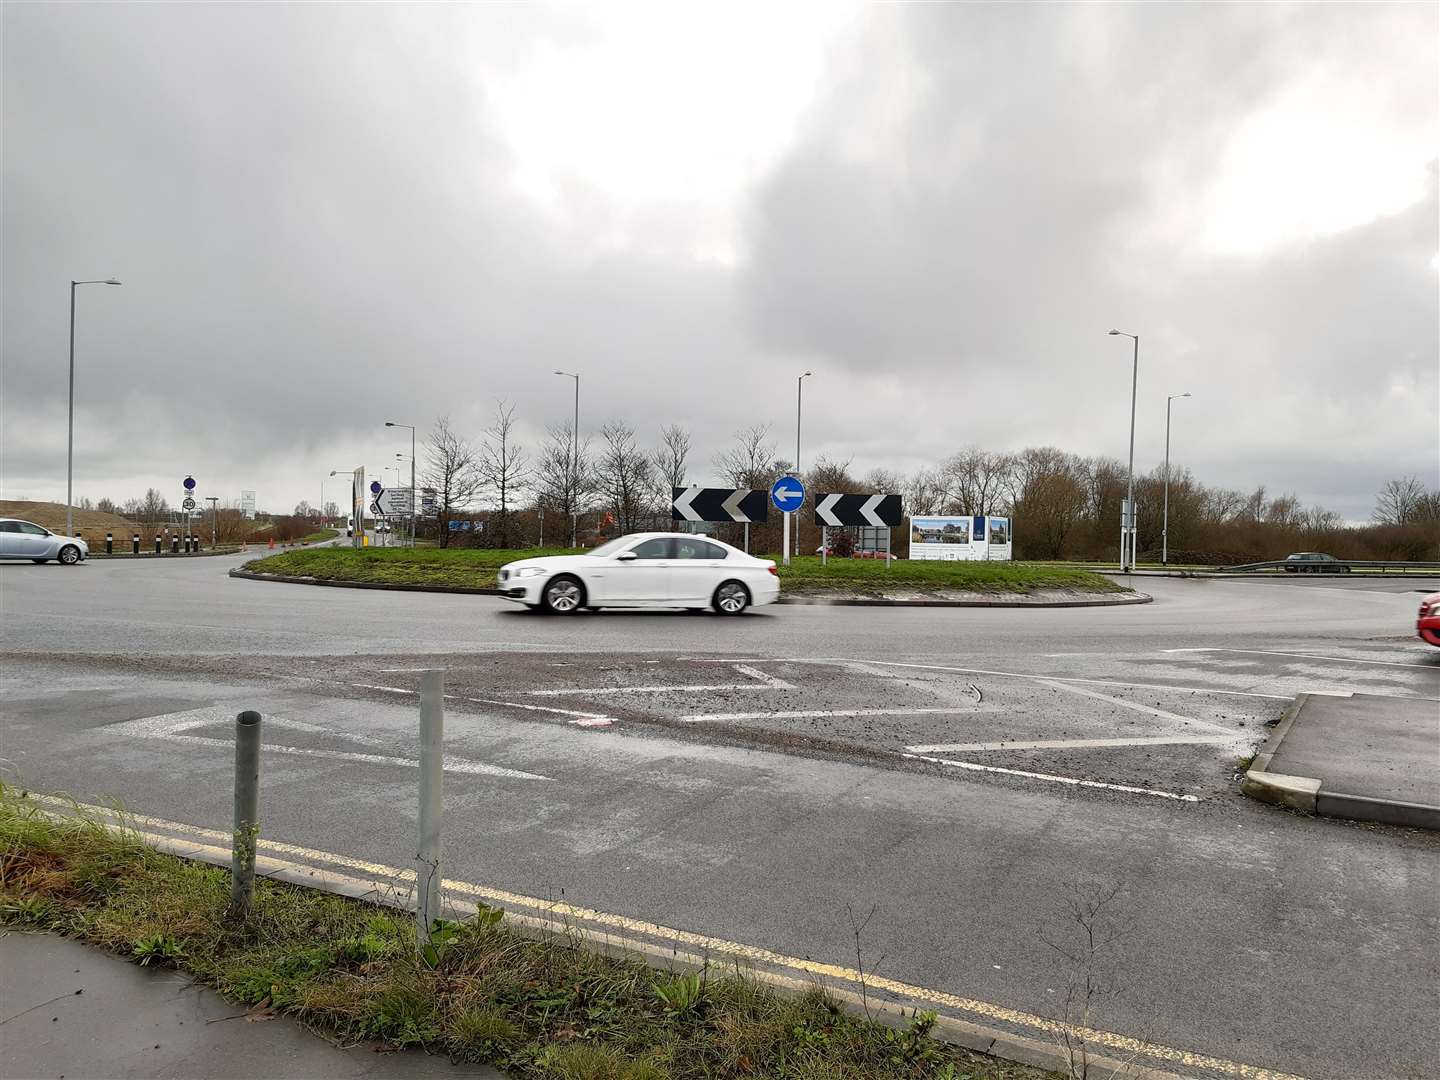 The supermarket is proposed for the other side of Orbital Park roundabout